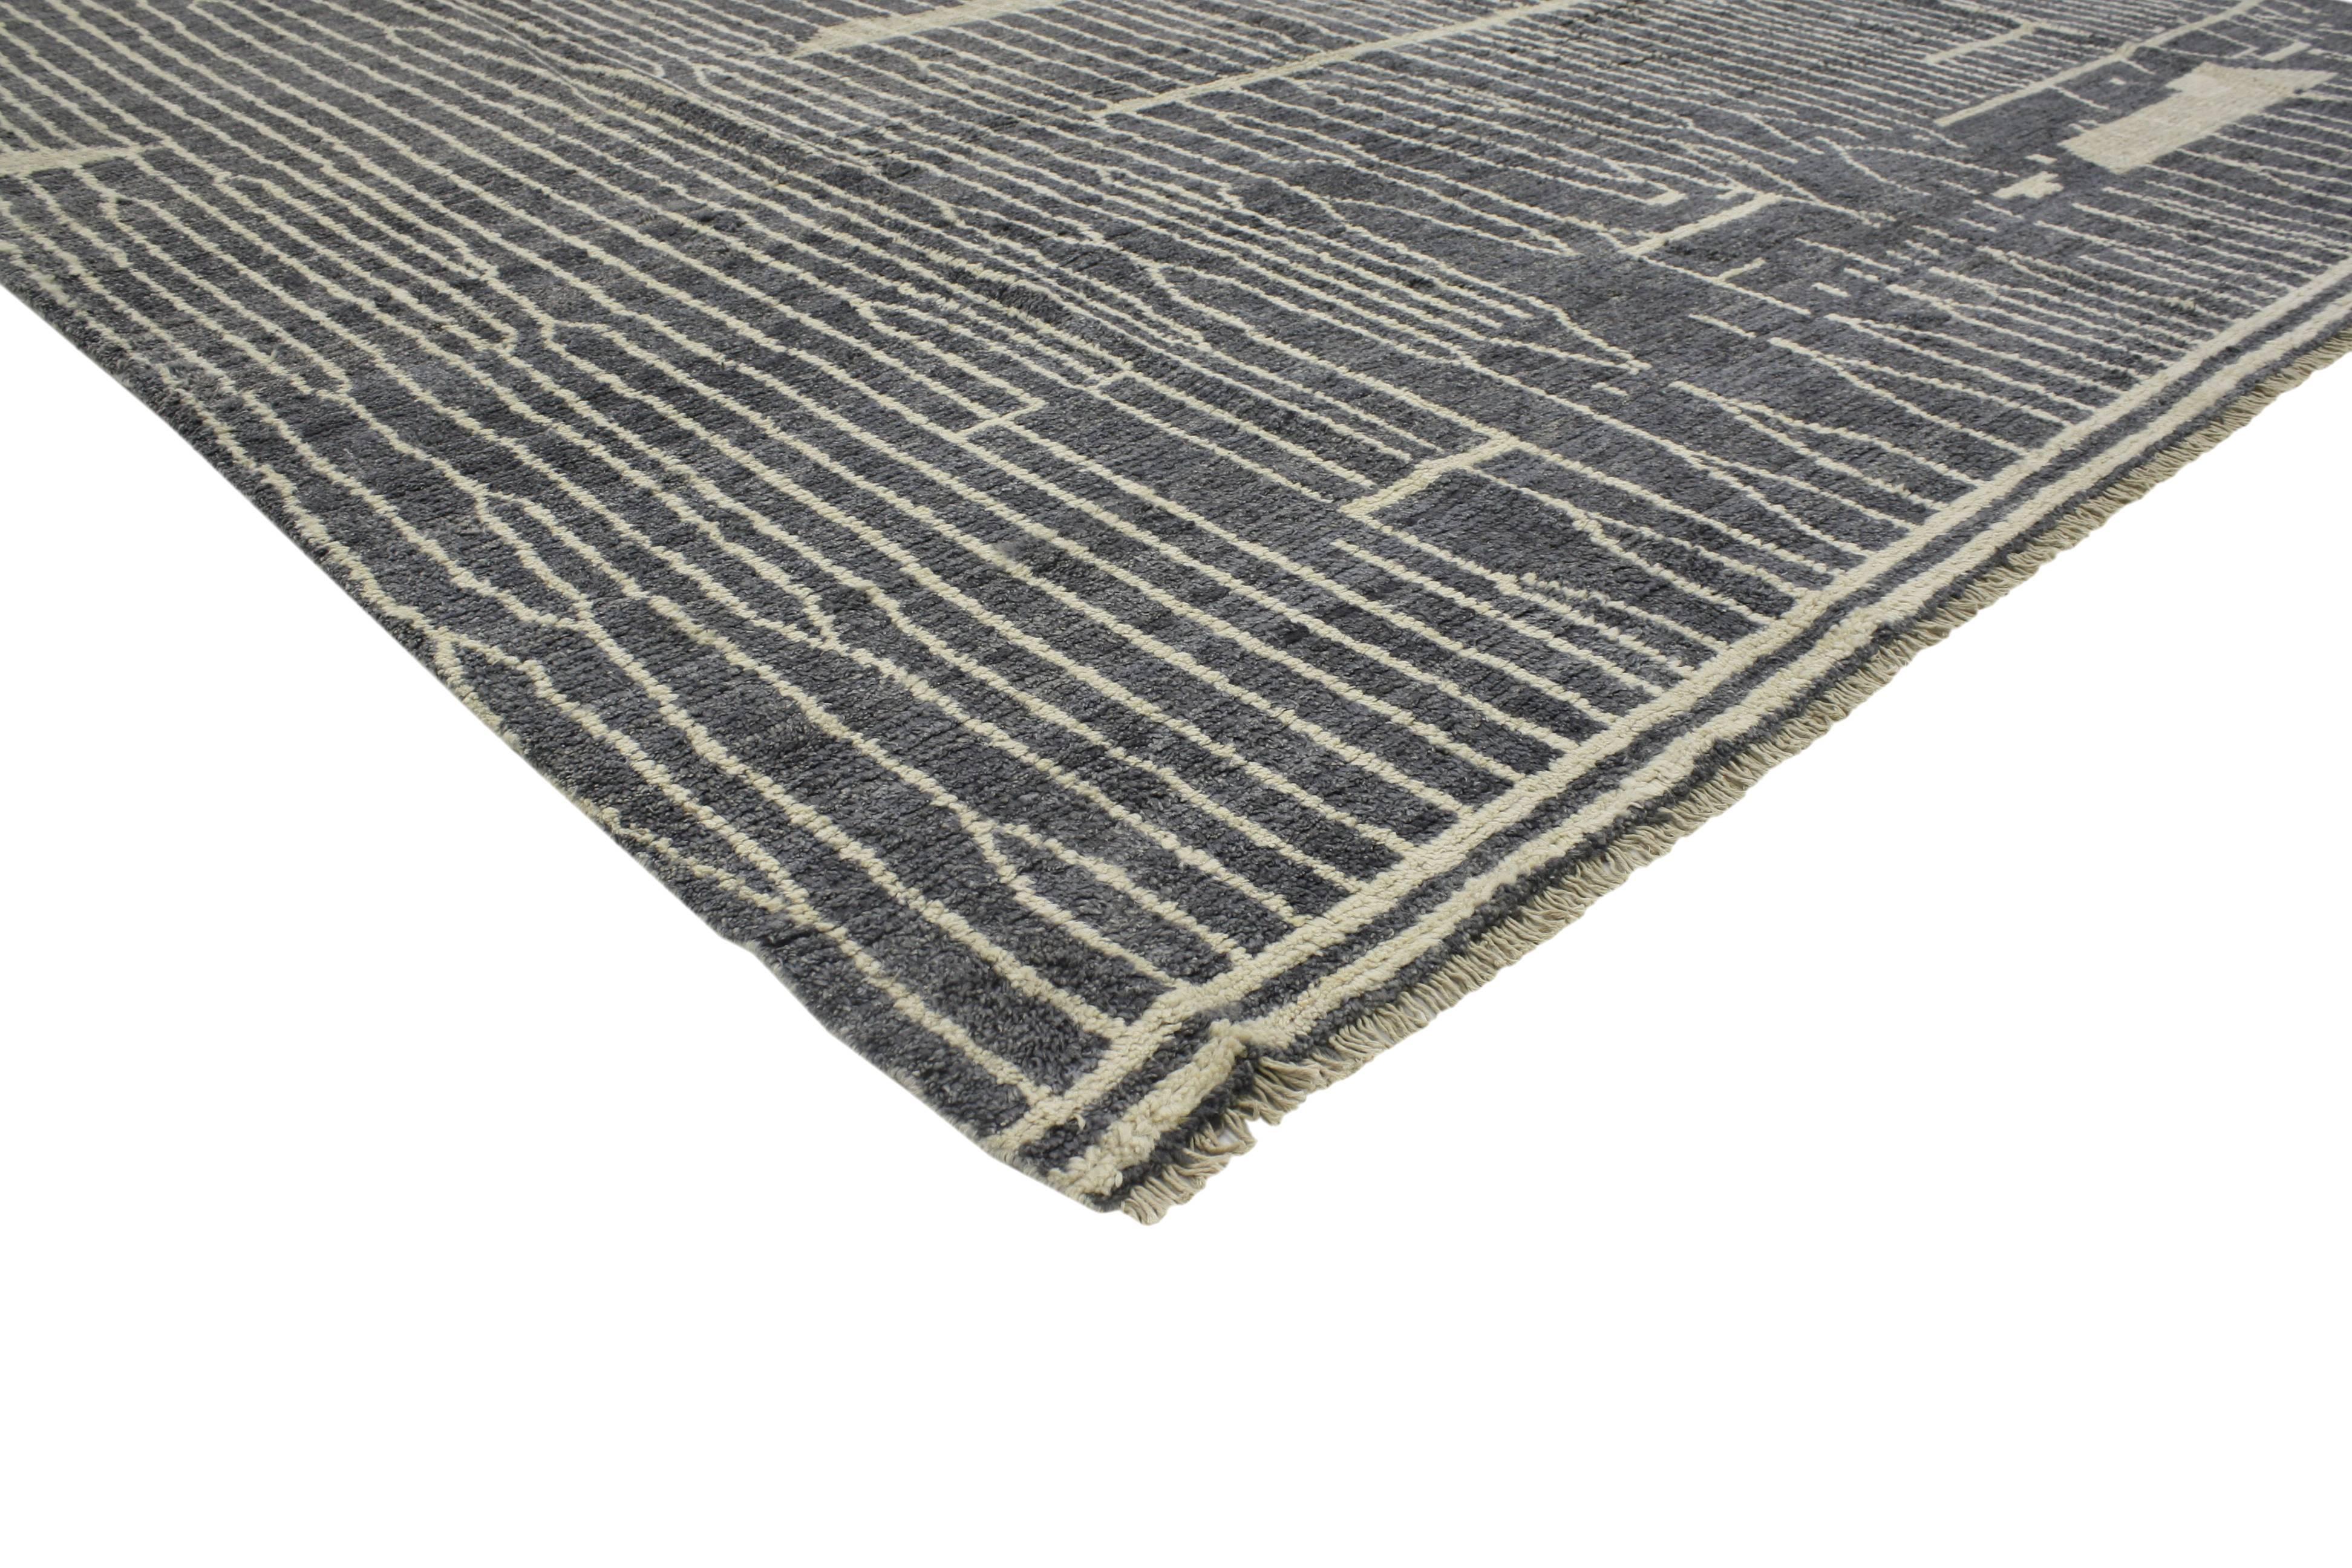 Impeccable craftsmanship and modern style, this plush grey rug is Classic and a beautiful balance of warm and cool. The abstract design combined with its plush wool complement the trending style. With its well defined lines and natural beauty, this